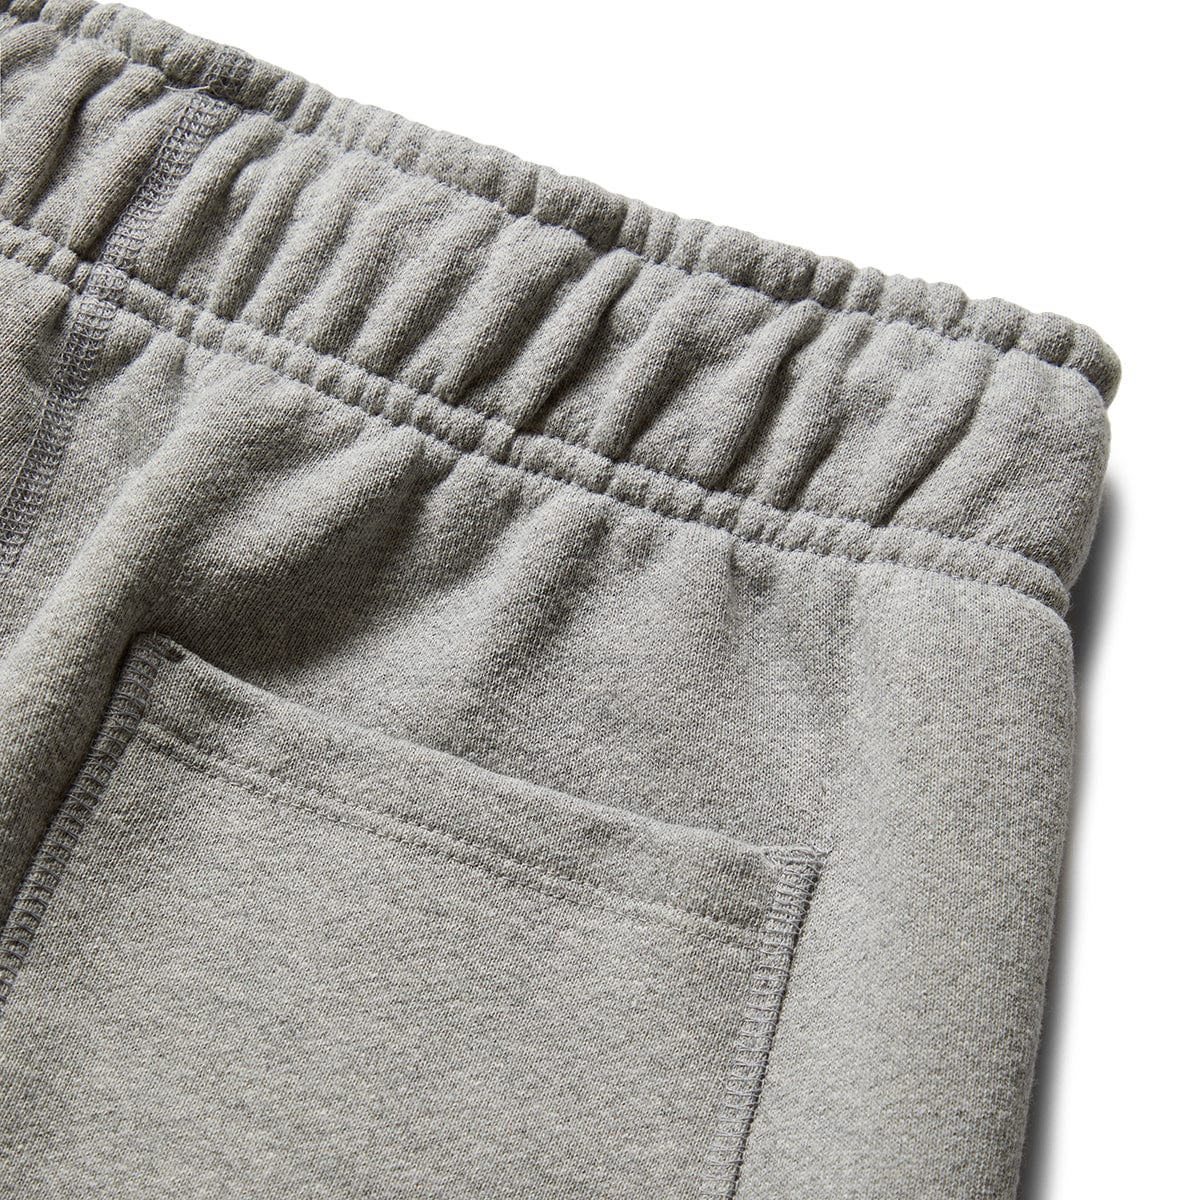 New Balance Bottoms MADE IN USA SWEATPANT